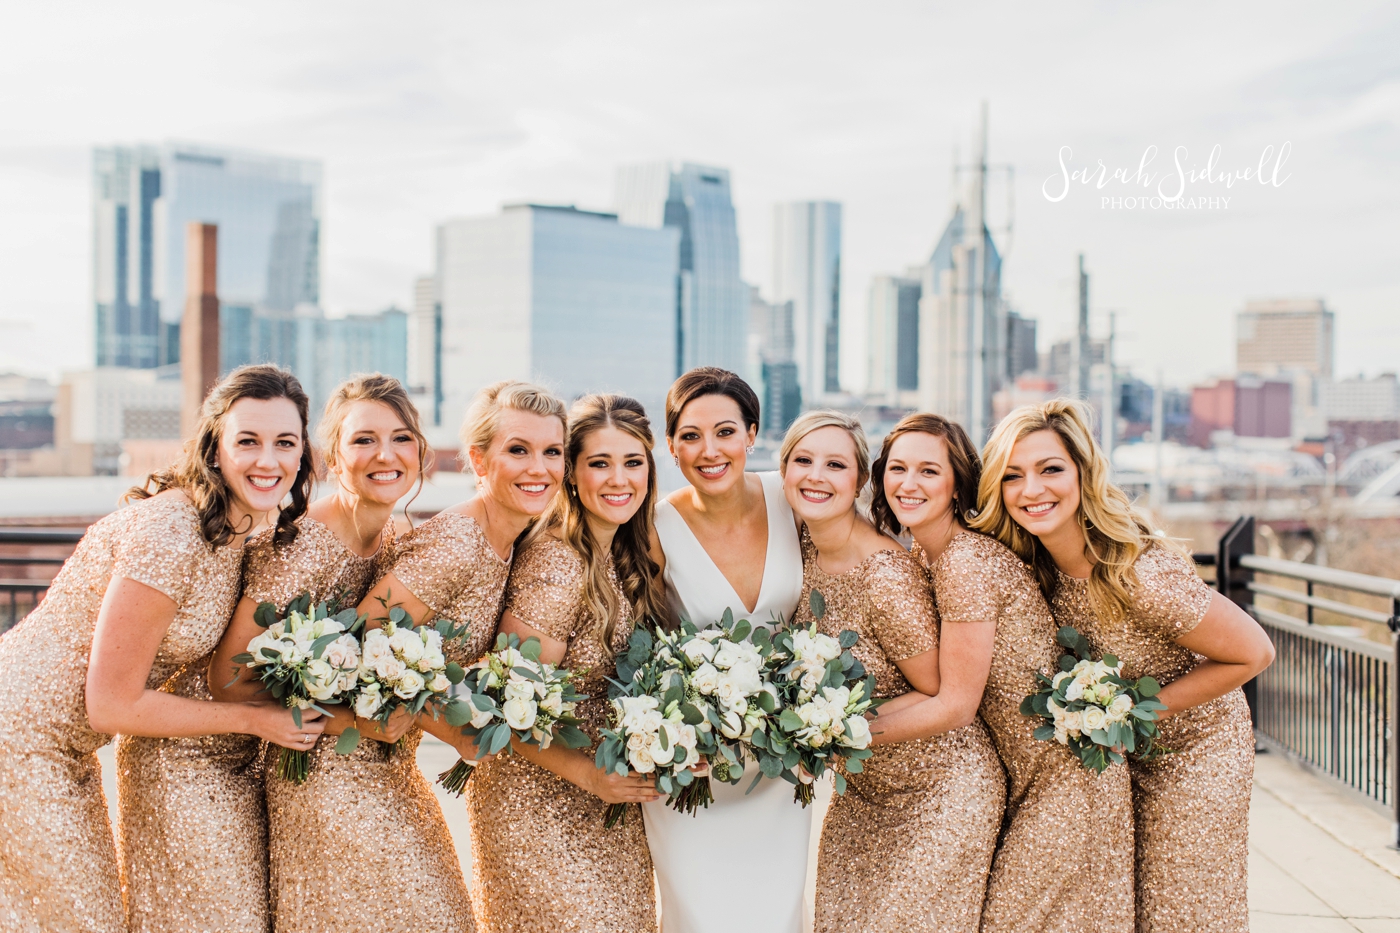 A bridal party pose together | Sarah Sidwell Photography | The Bell Tower